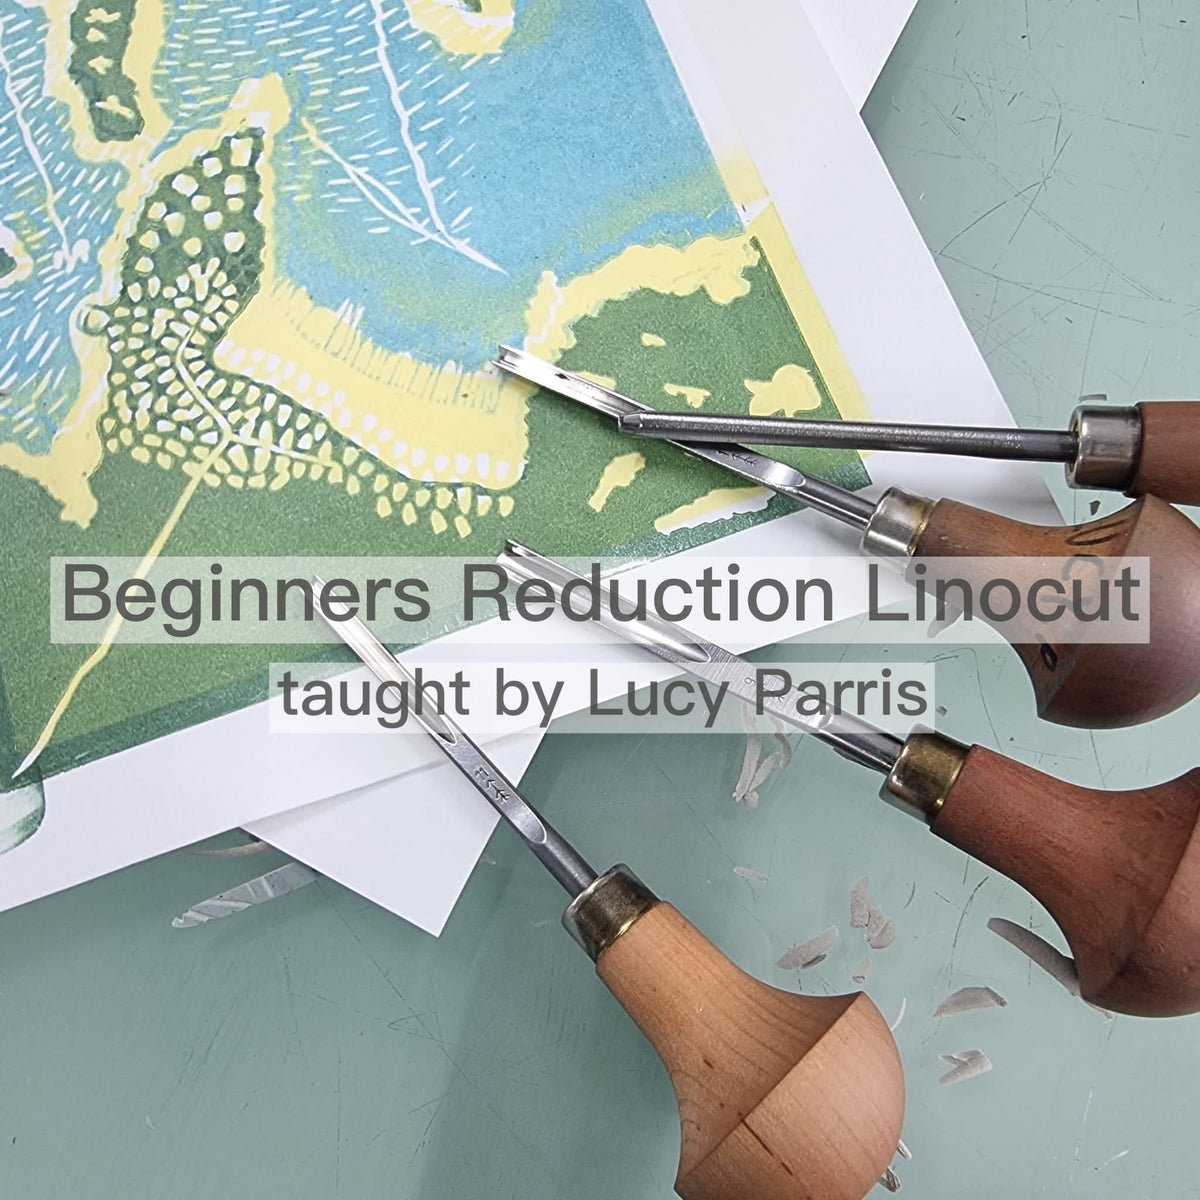 Beginners Reduction Linocut Taught by Lucy Parris